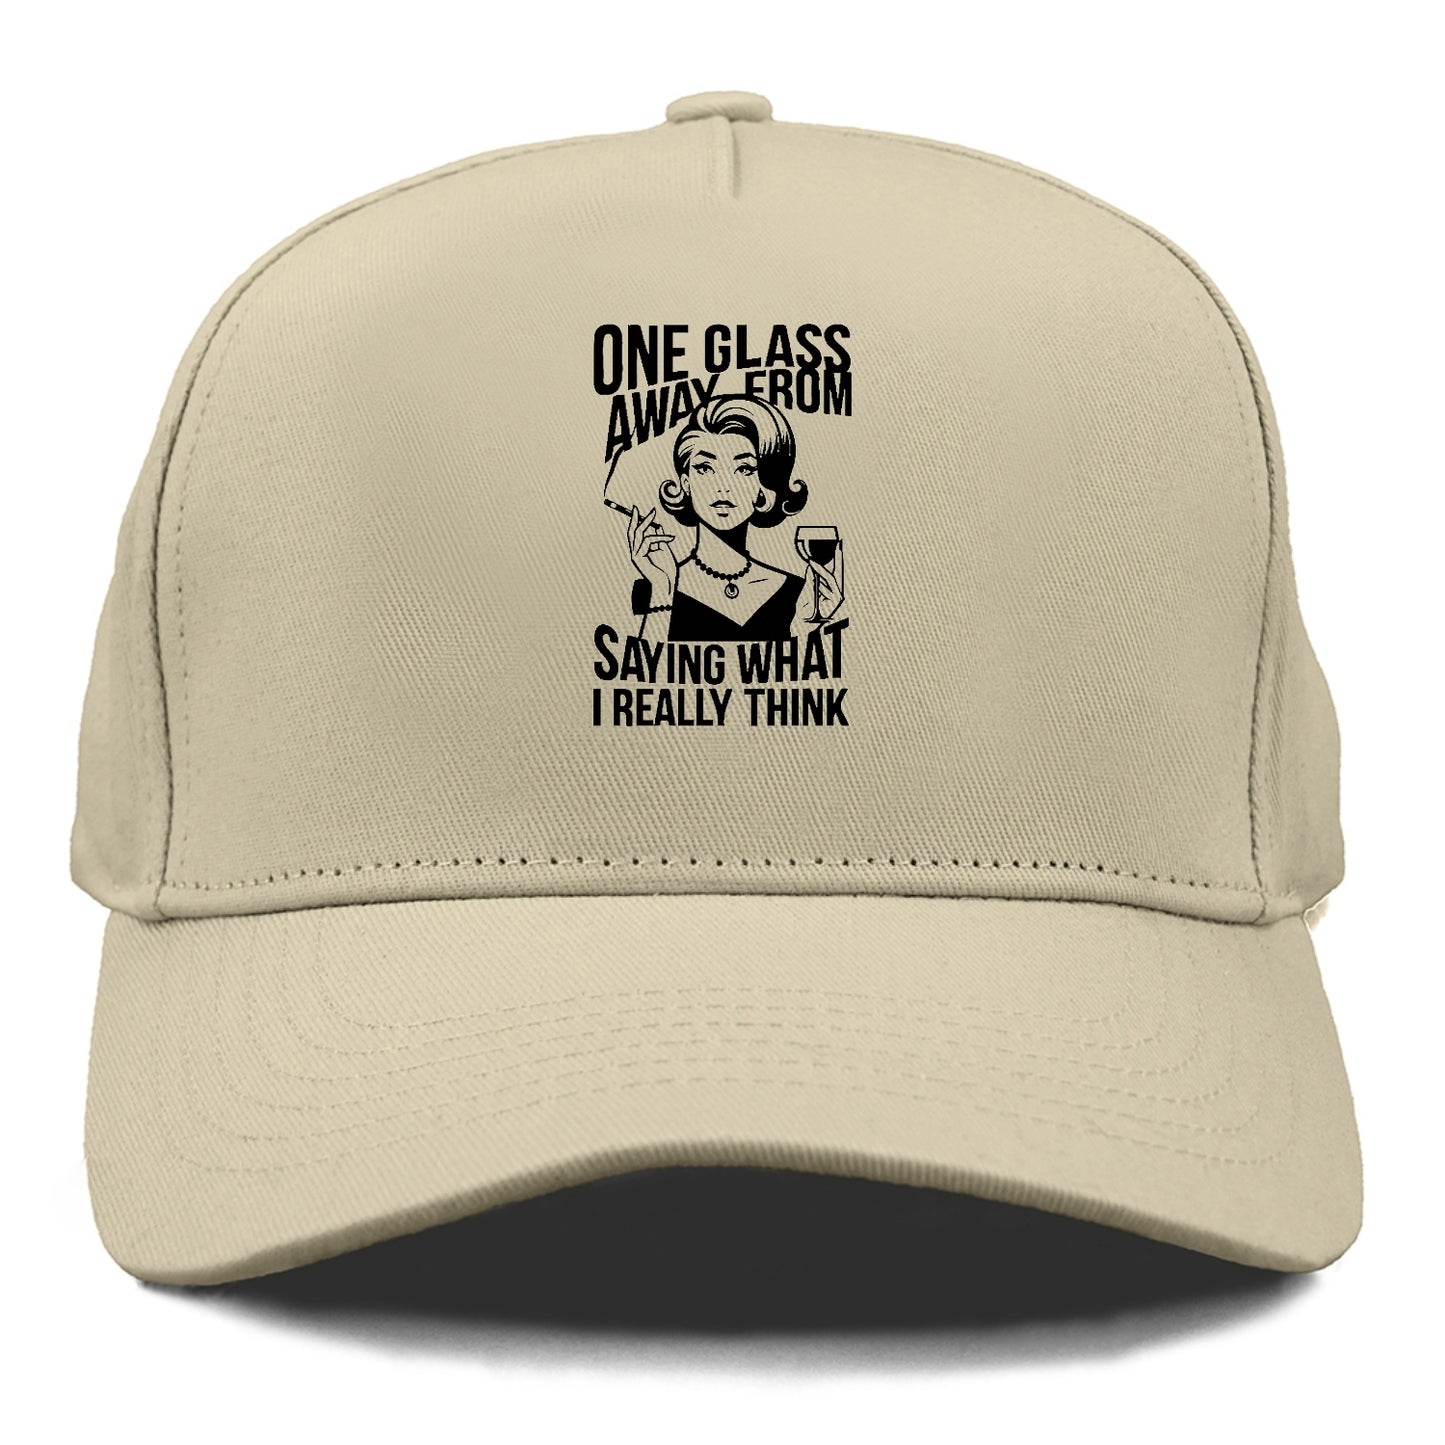 one glass away from saying what i really think Hat